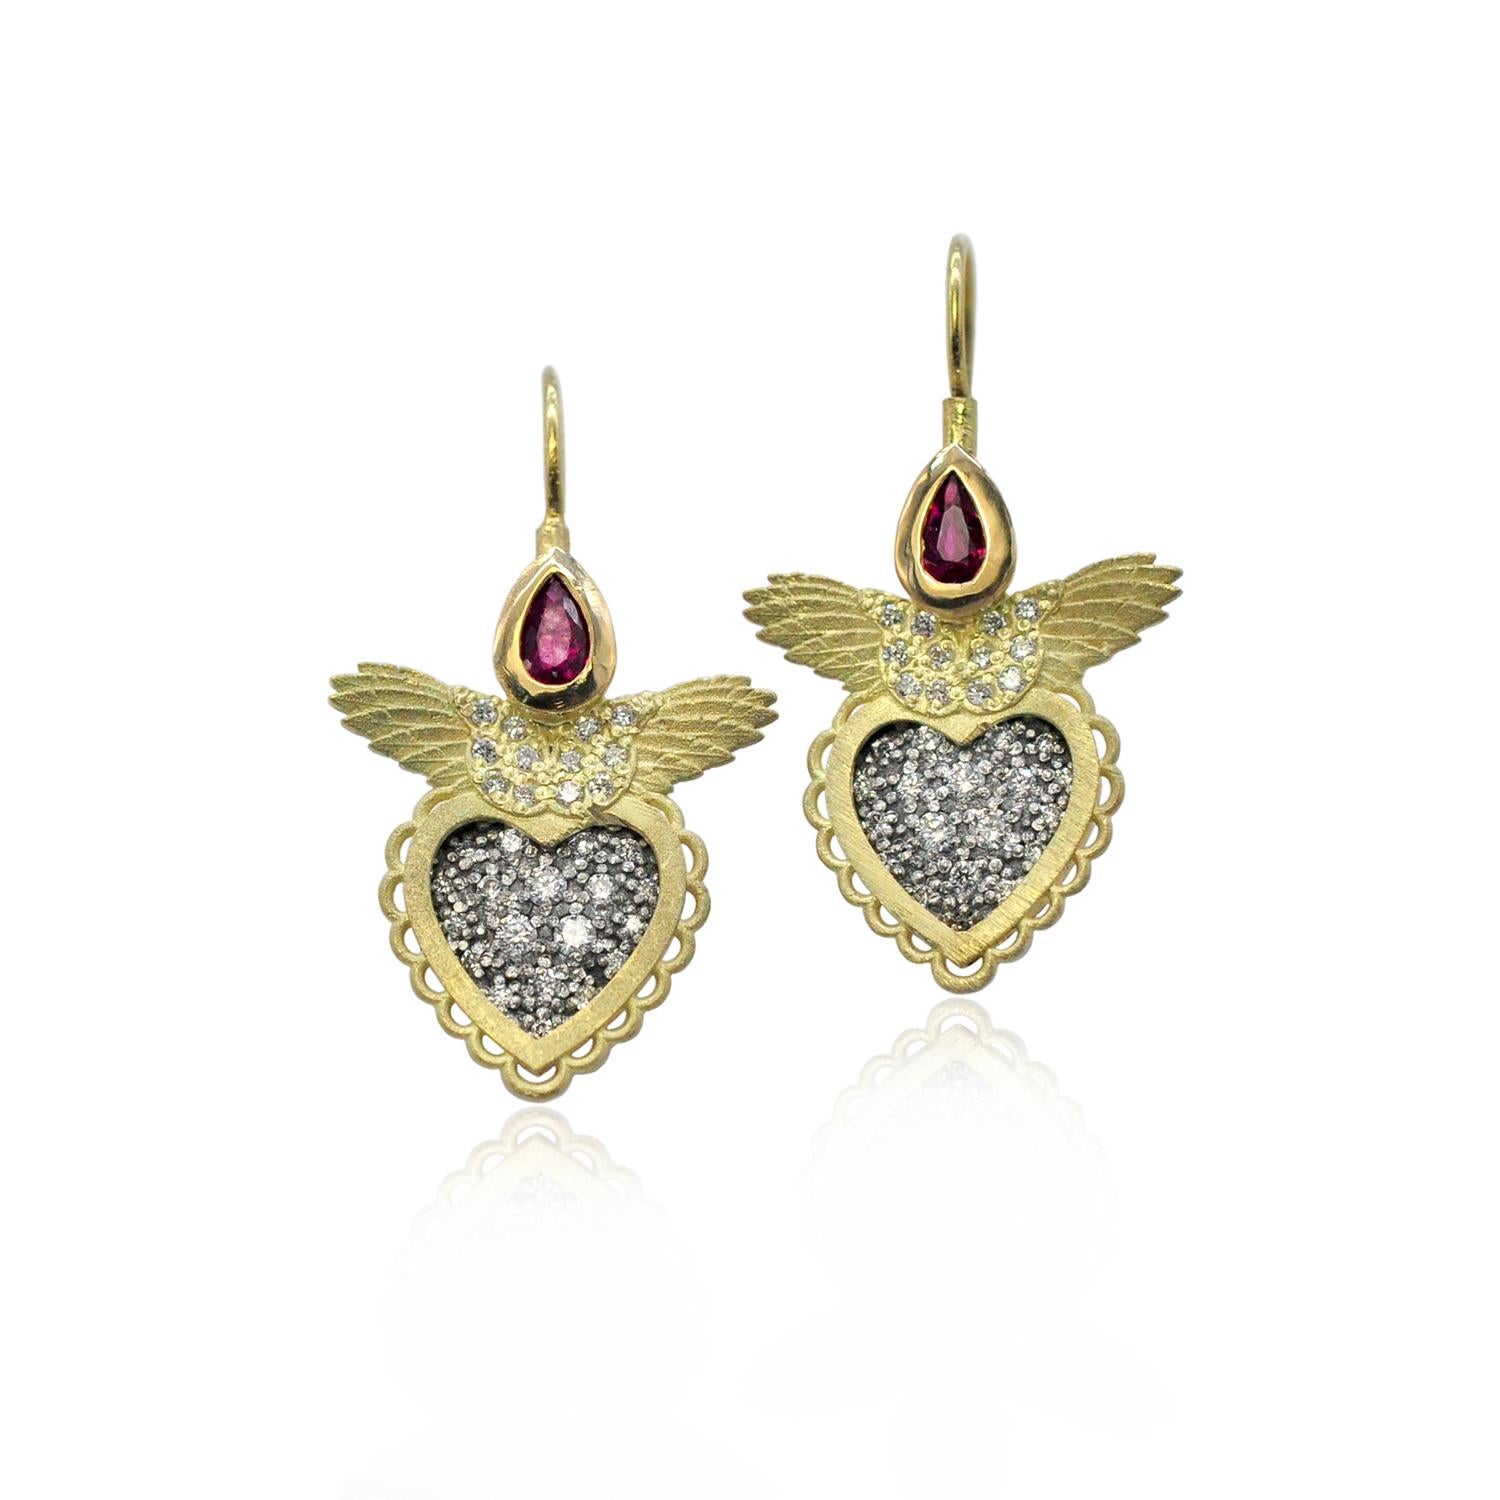 Oxidized silver centers glimmer with pave set diamonds inside a bright 18k yellow gold scalloped valentine style heart. Our signature textured feathers with more pave set diamonds are topped with juicy red faceted, pear shaped rubies. The earrings